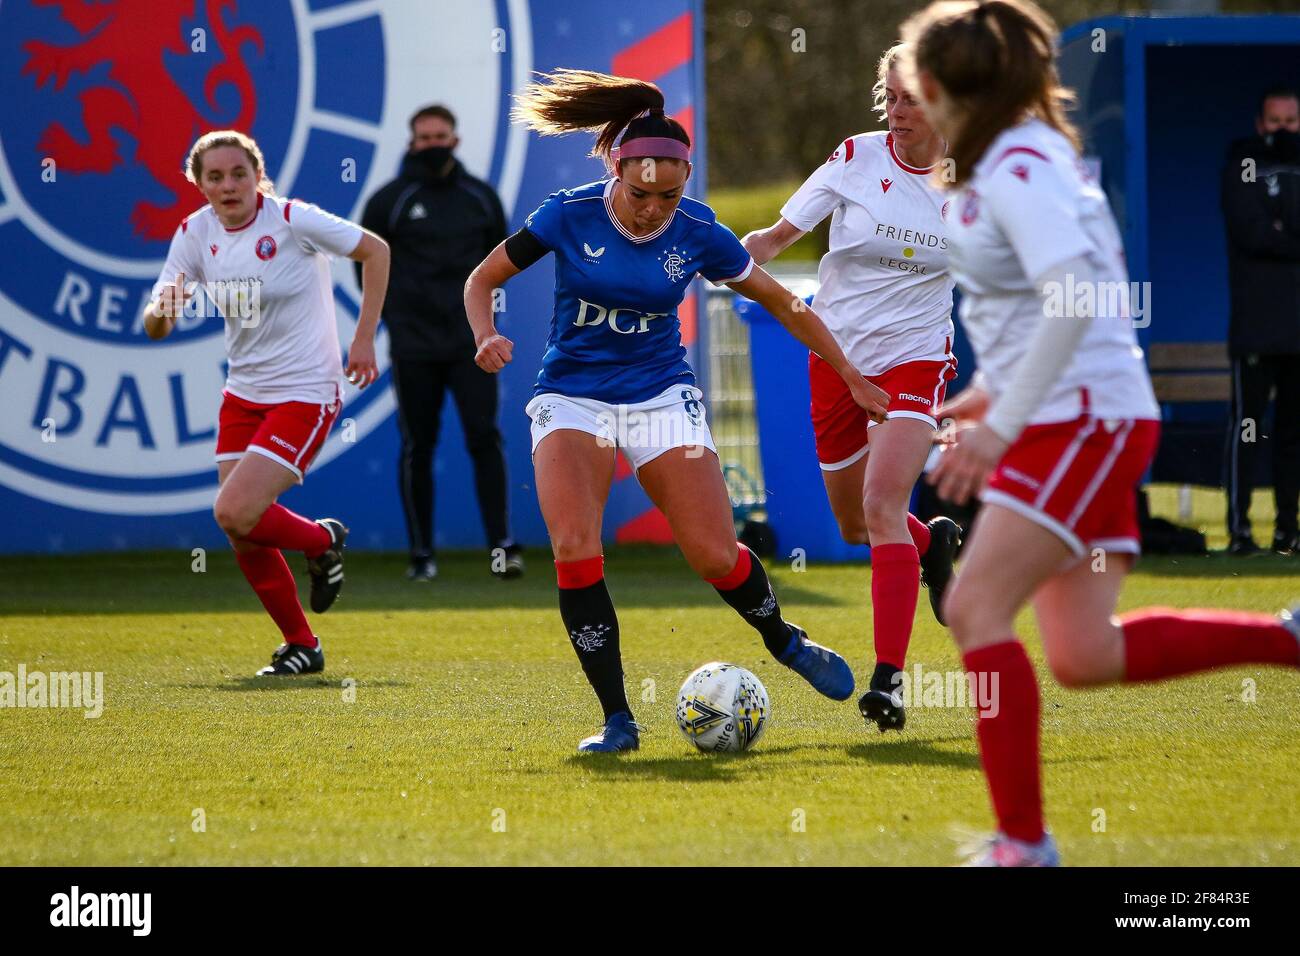 Glasgow, UK. 11th Apr, 2021. Kirsten Reilly (#8) of Rangers Women FC on the ball during the Scottish Building Society SWPL1 Fixture Rangers FC vs Spartans FC at Rangers Training Centre, Glasgow, 11/04/2021 | Images courtesy of www.collargeimages.co.uk Credit: Colin Poultney/Alamy Live News Stock Photo